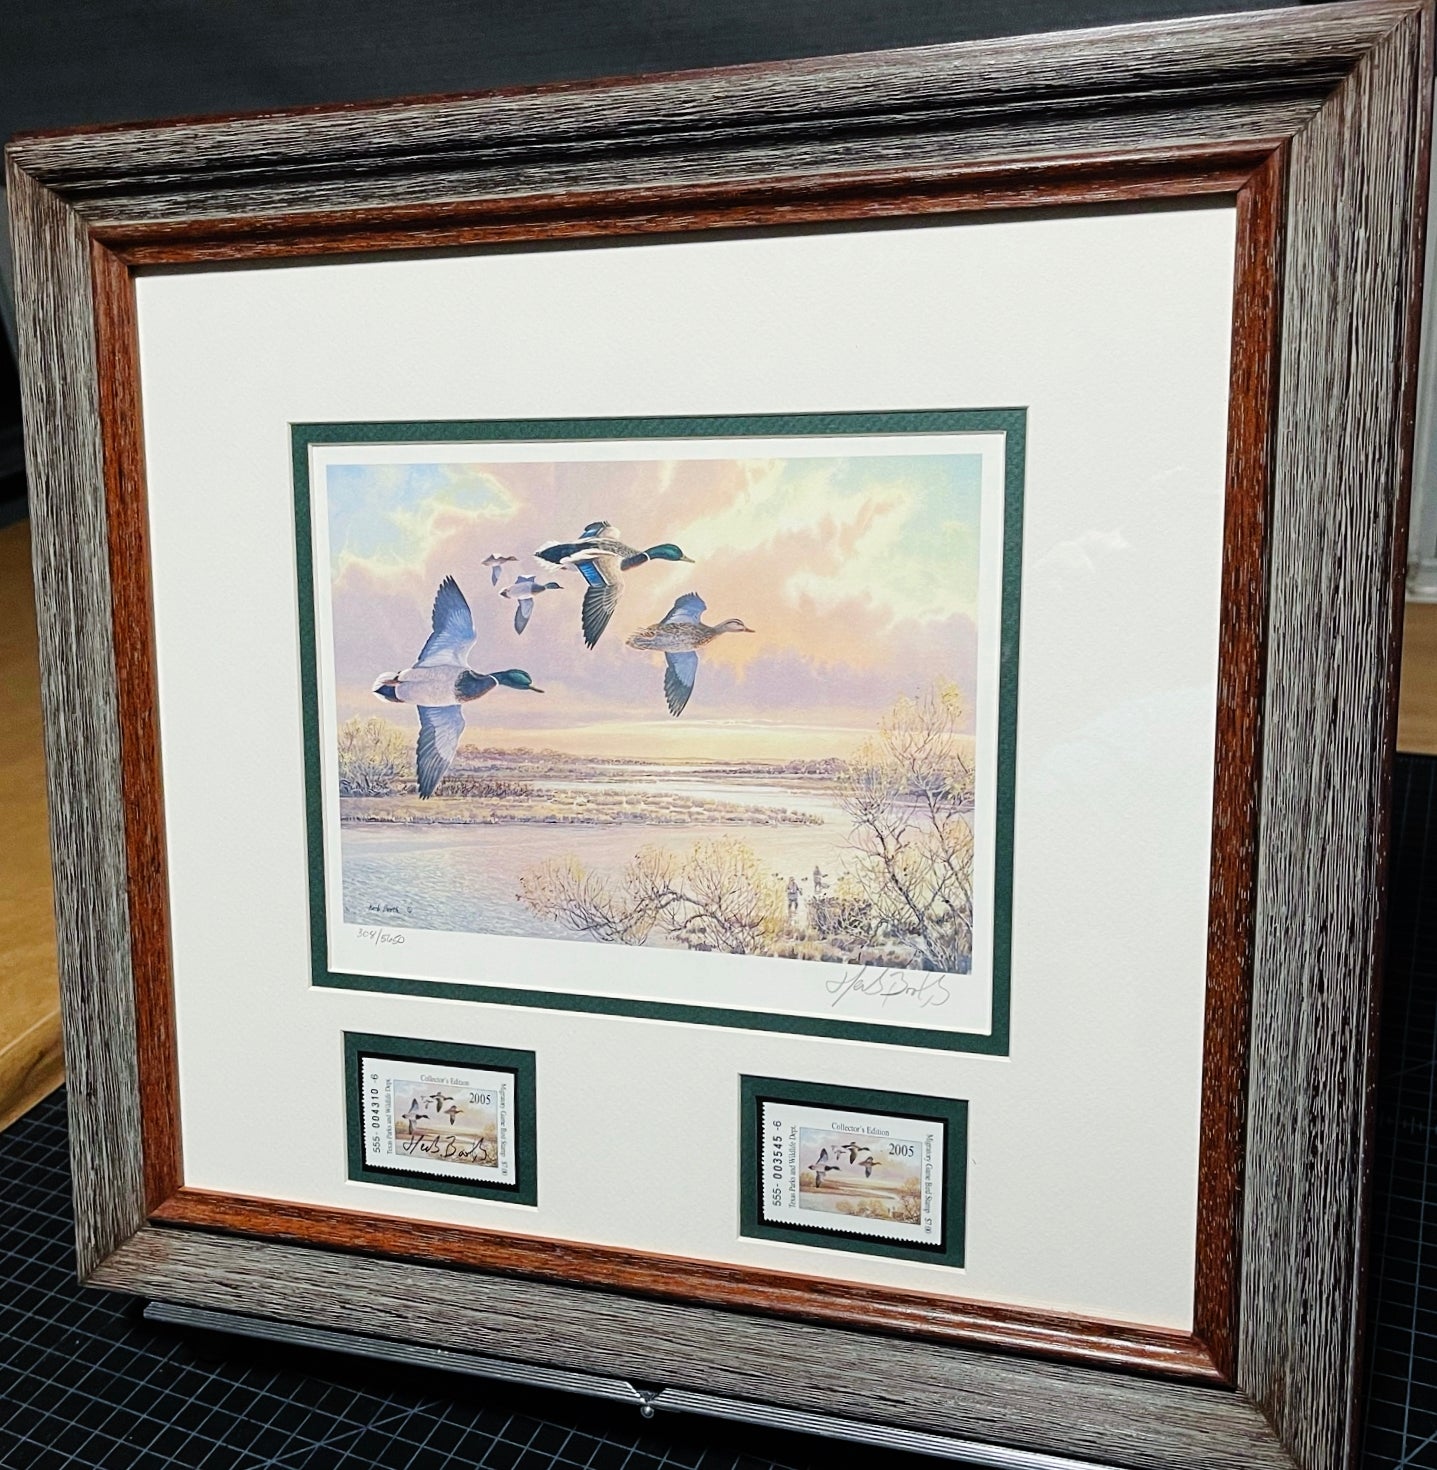 Herb Booth - 2005 Texas Migratory Waterfowl Duck Stamp Print With Double Stamps - Brand New Custom Sporting Frame